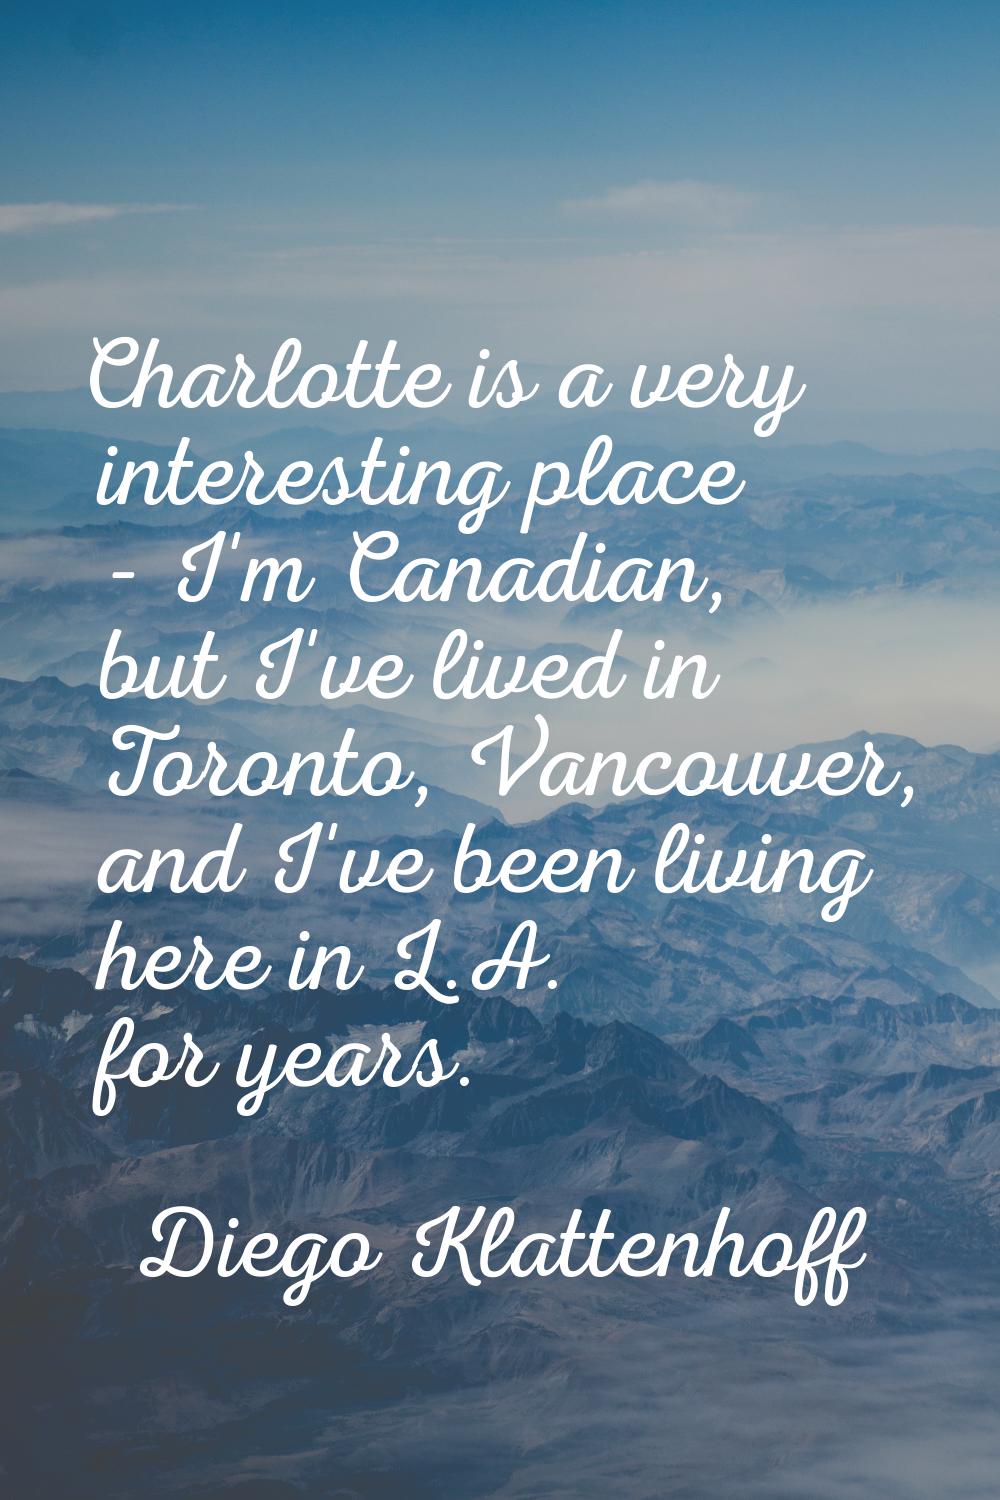 Charlotte is a very interesting place - I'm Canadian, but I've lived in Toronto, Vancouver, and I'v